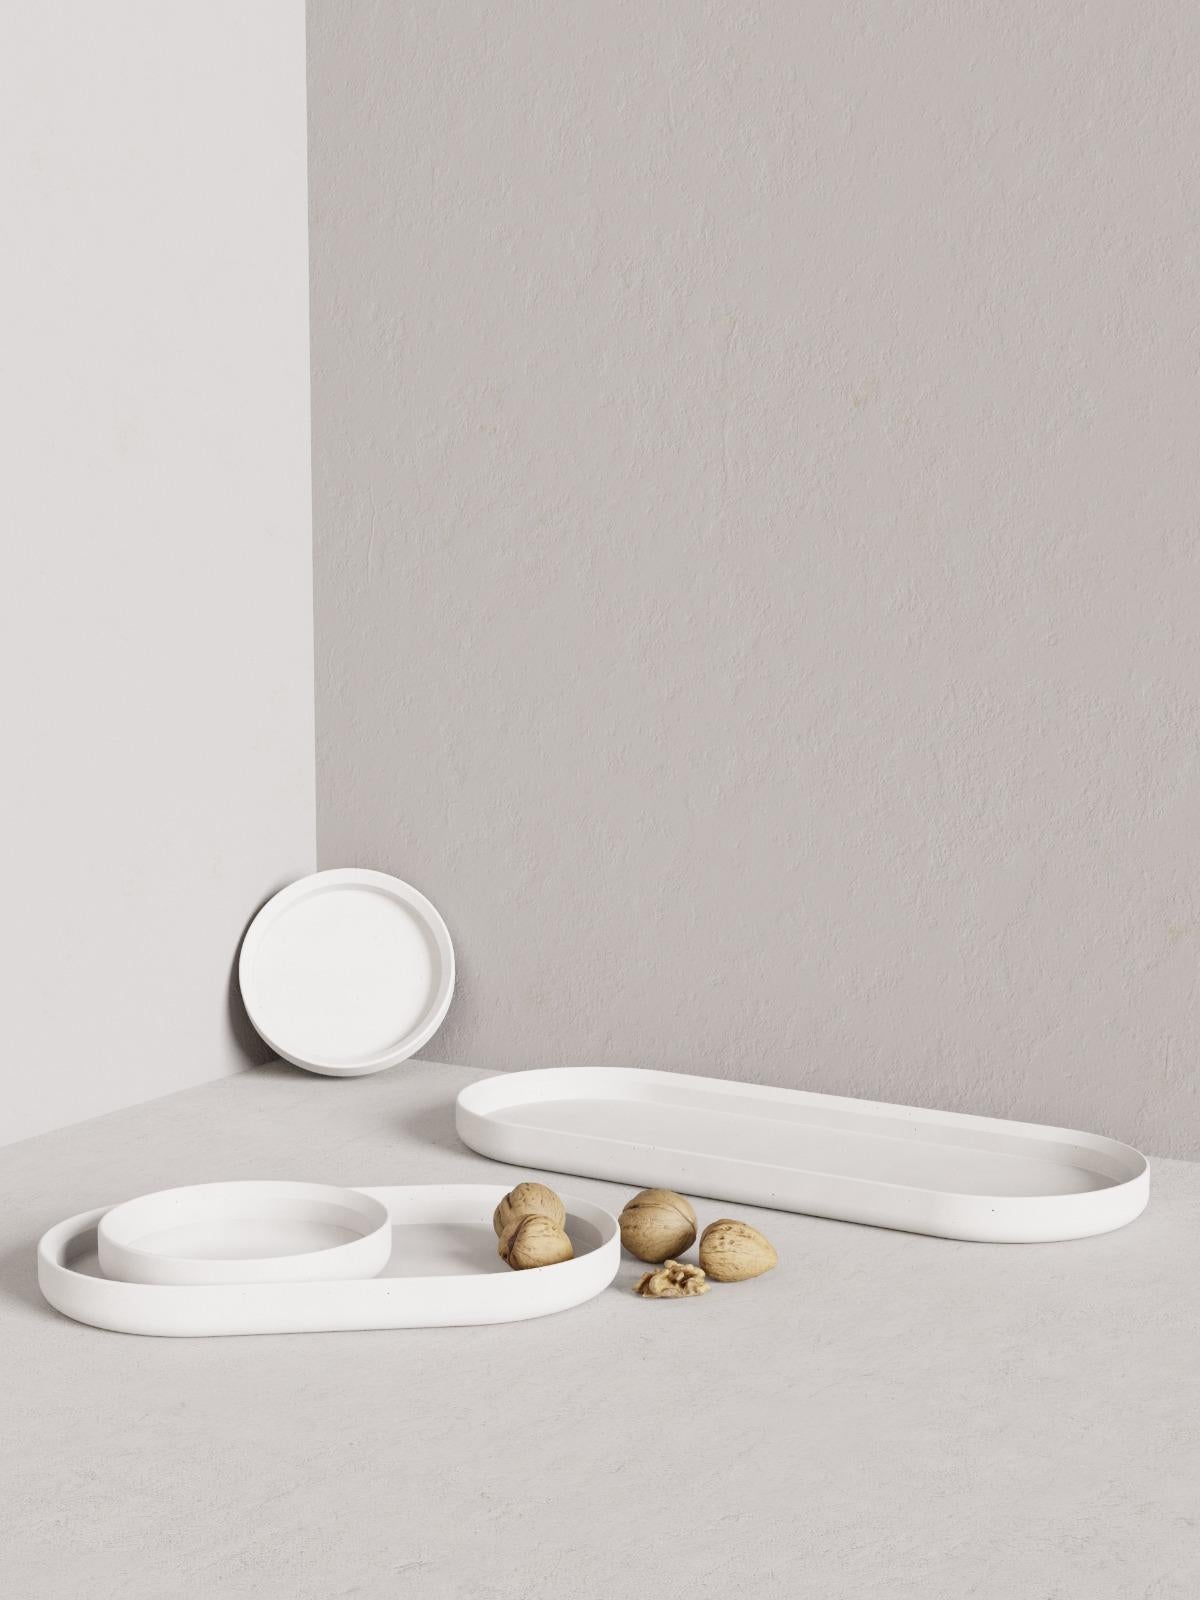 Renzo in a family of multipurpose trays with a very smooth surface and soft curved edges, now available in a different color composition. Each piece is a unique, no two are the same.

Mod III Measure: 60 x 23 x 4cm.